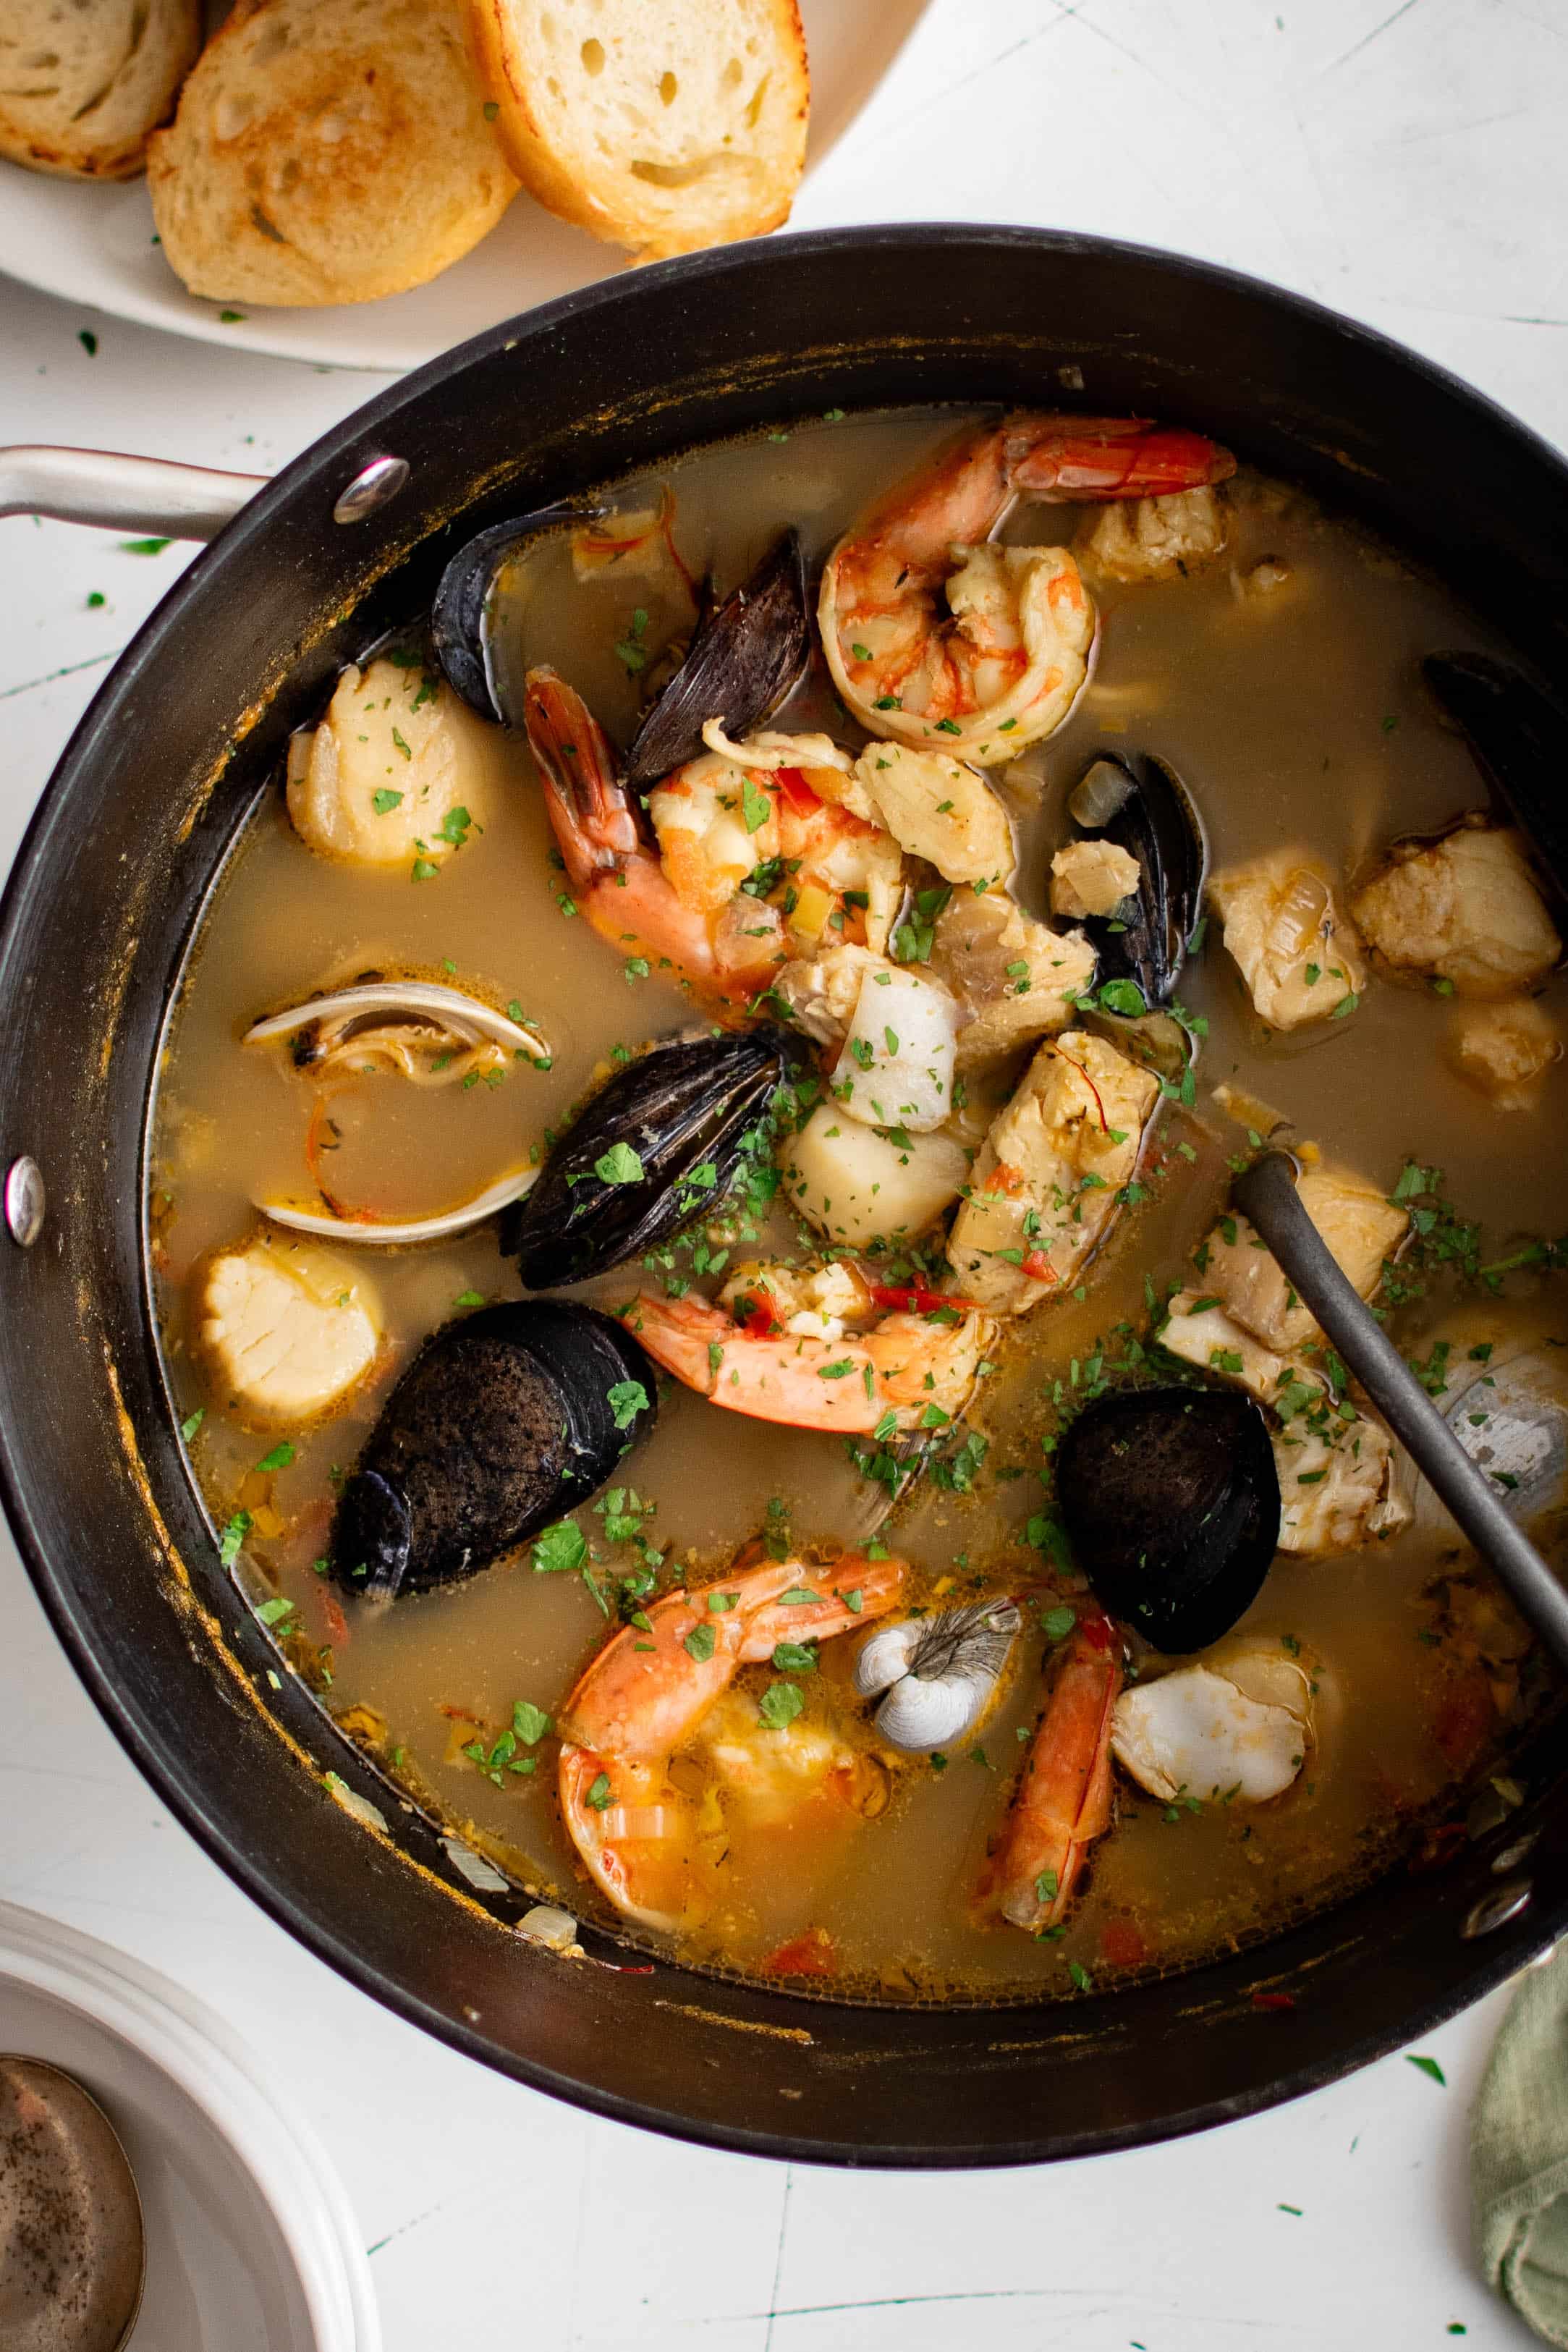 Overhead image of a large pot filled with bouillabaisse, a French soup made with fish and fresh seafood.